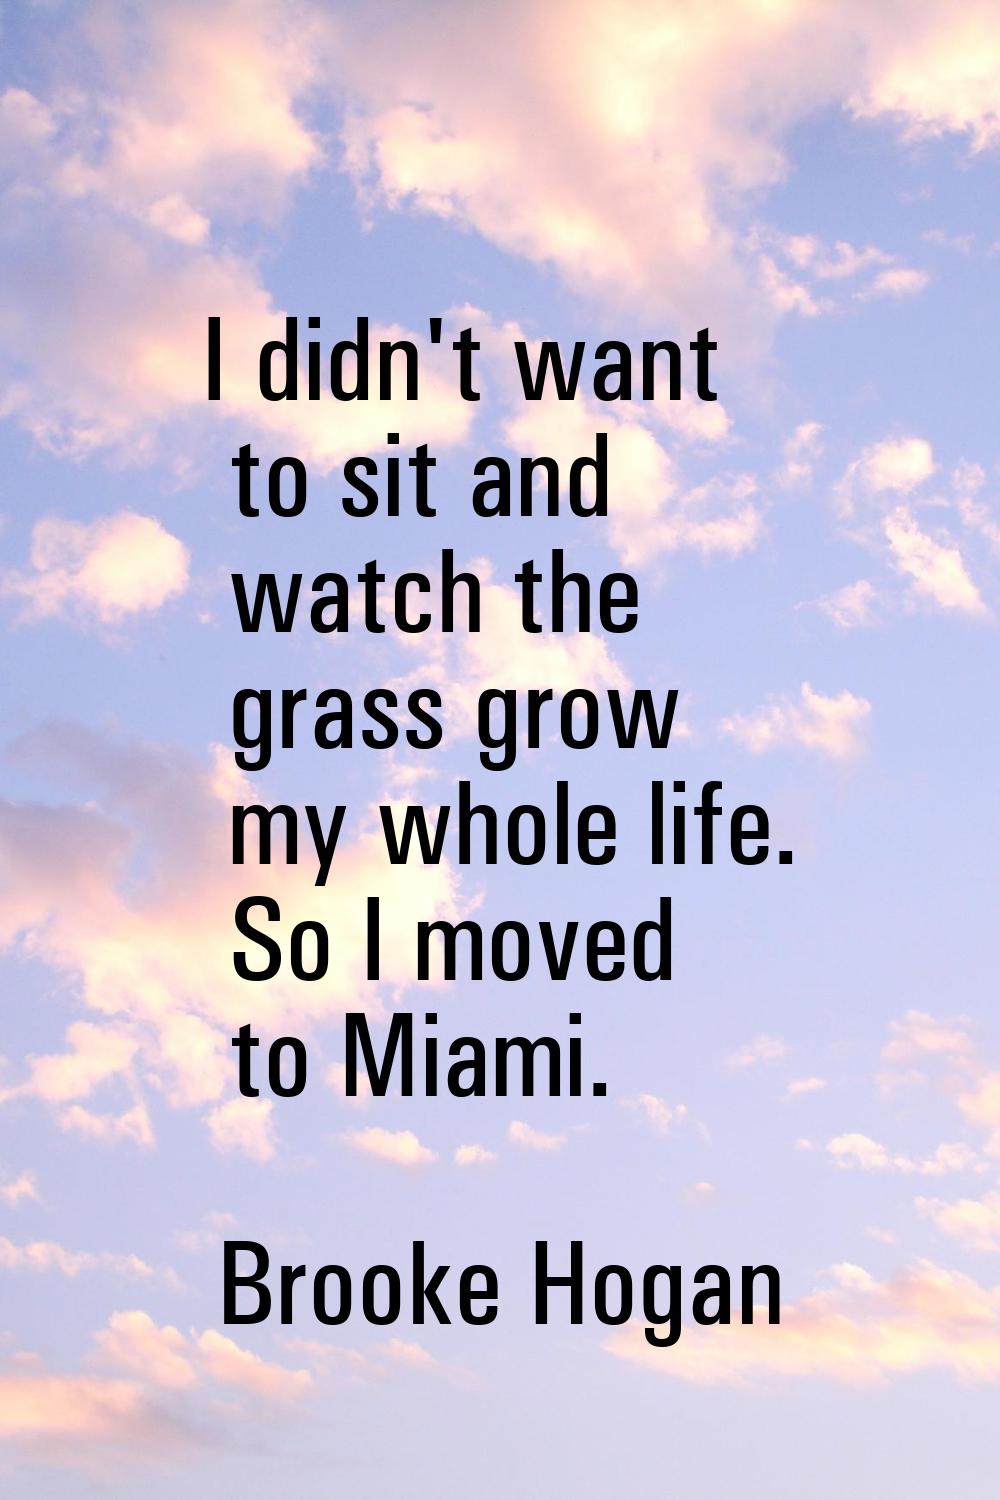 I didn't want to sit and watch the grass grow my whole life. So I moved to Miami.